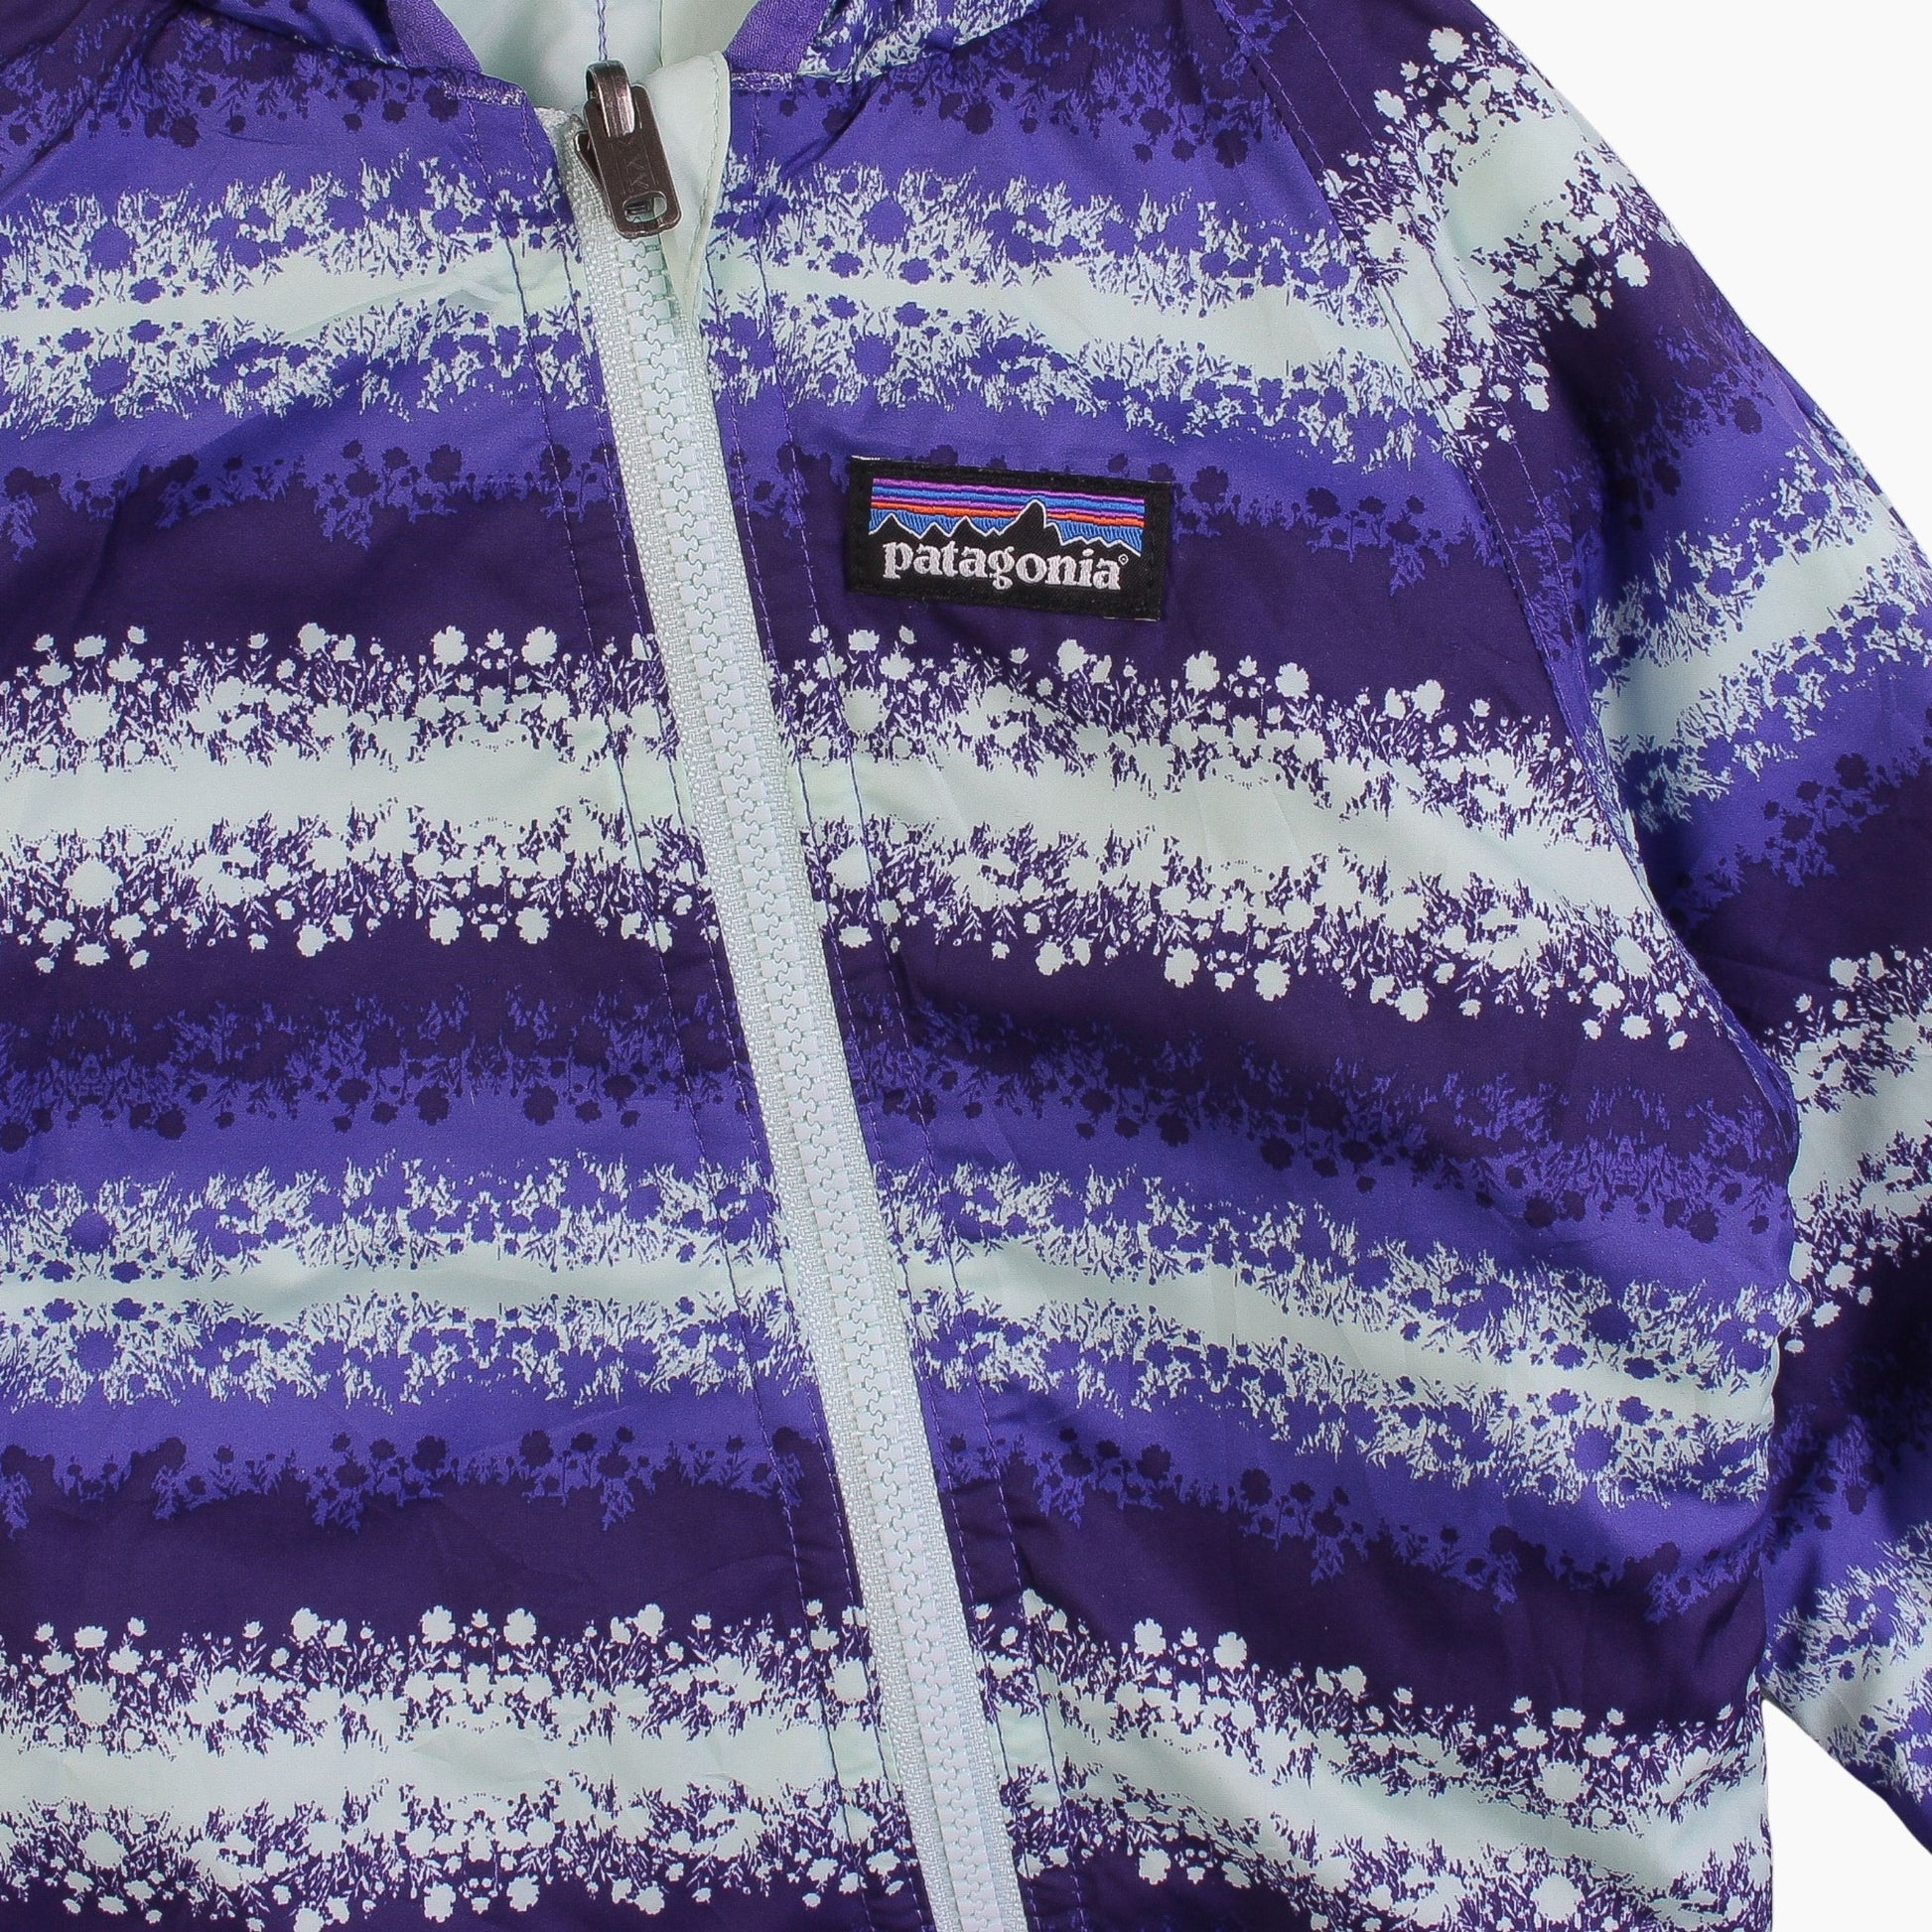 Vintage Patagonia Shell Suit - American Madness